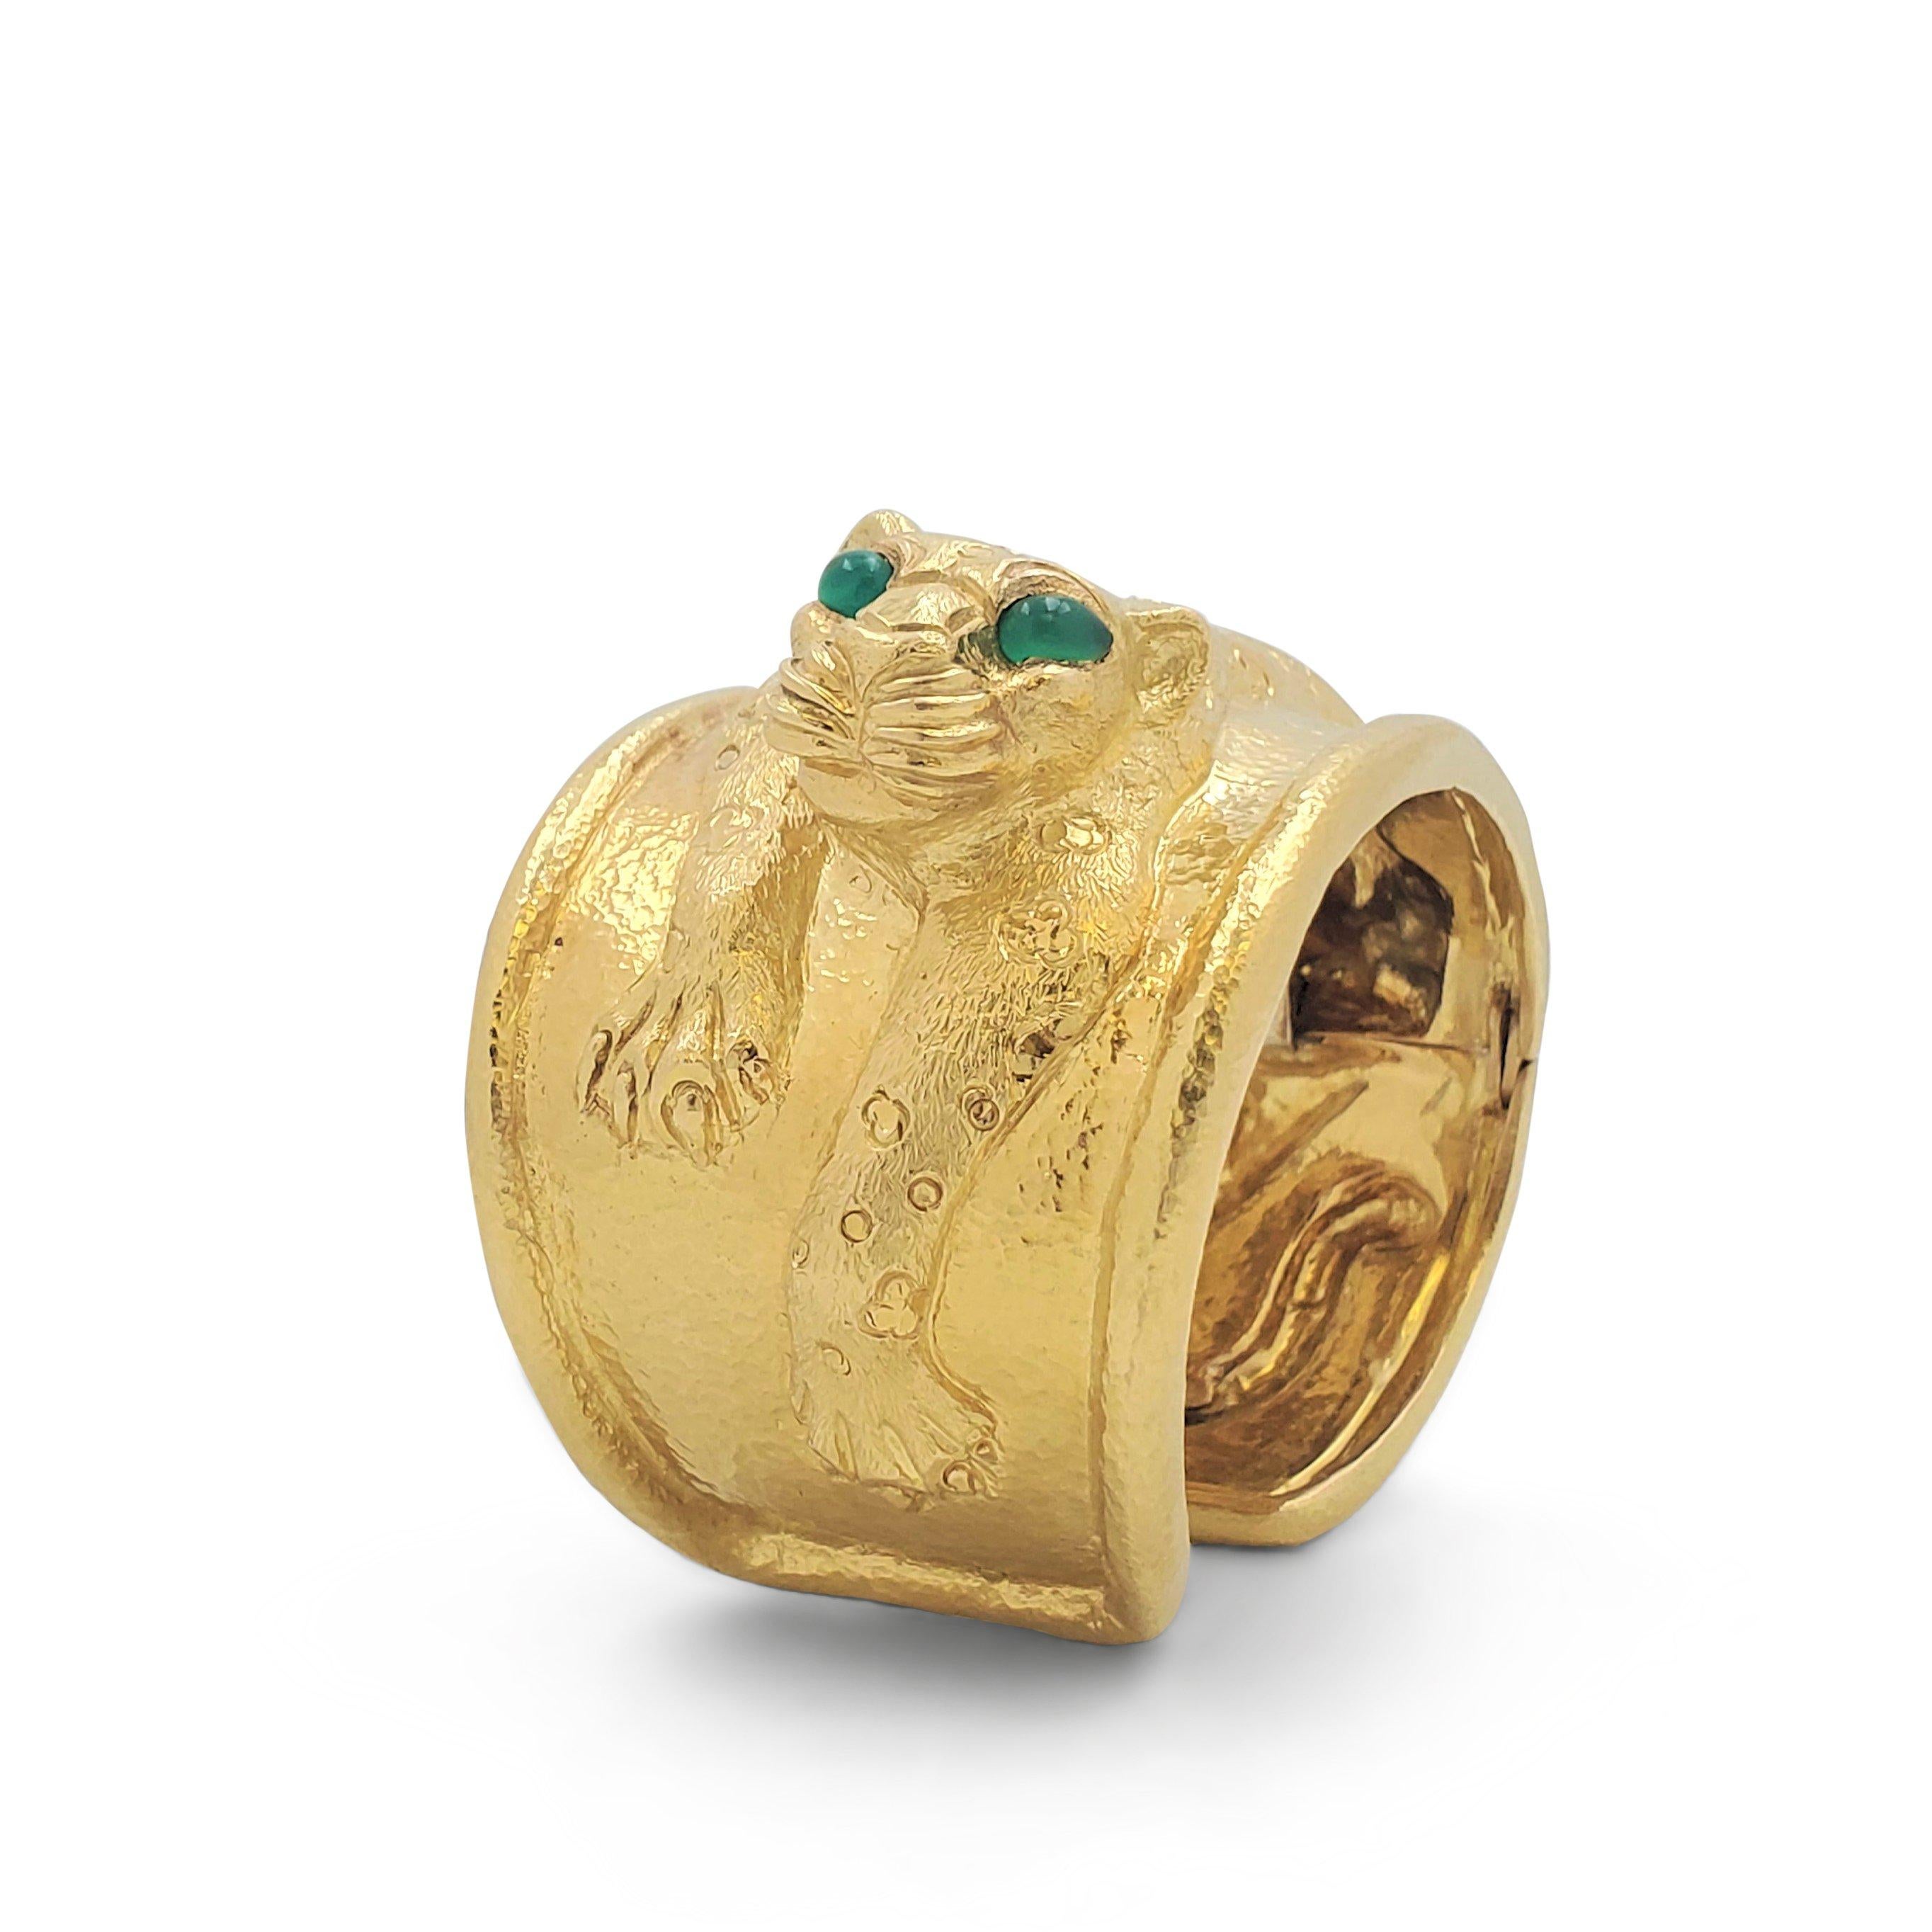 Authentic David Webb 'Repoussé Leopard' cuff bangle crafted in 18 karat yellow gold with enchanting emerald eyes. Designed as a sculptural Leopard in hunting posture, ready to pounce.  The leopard's coat is delicately engraved in a flower pattern,